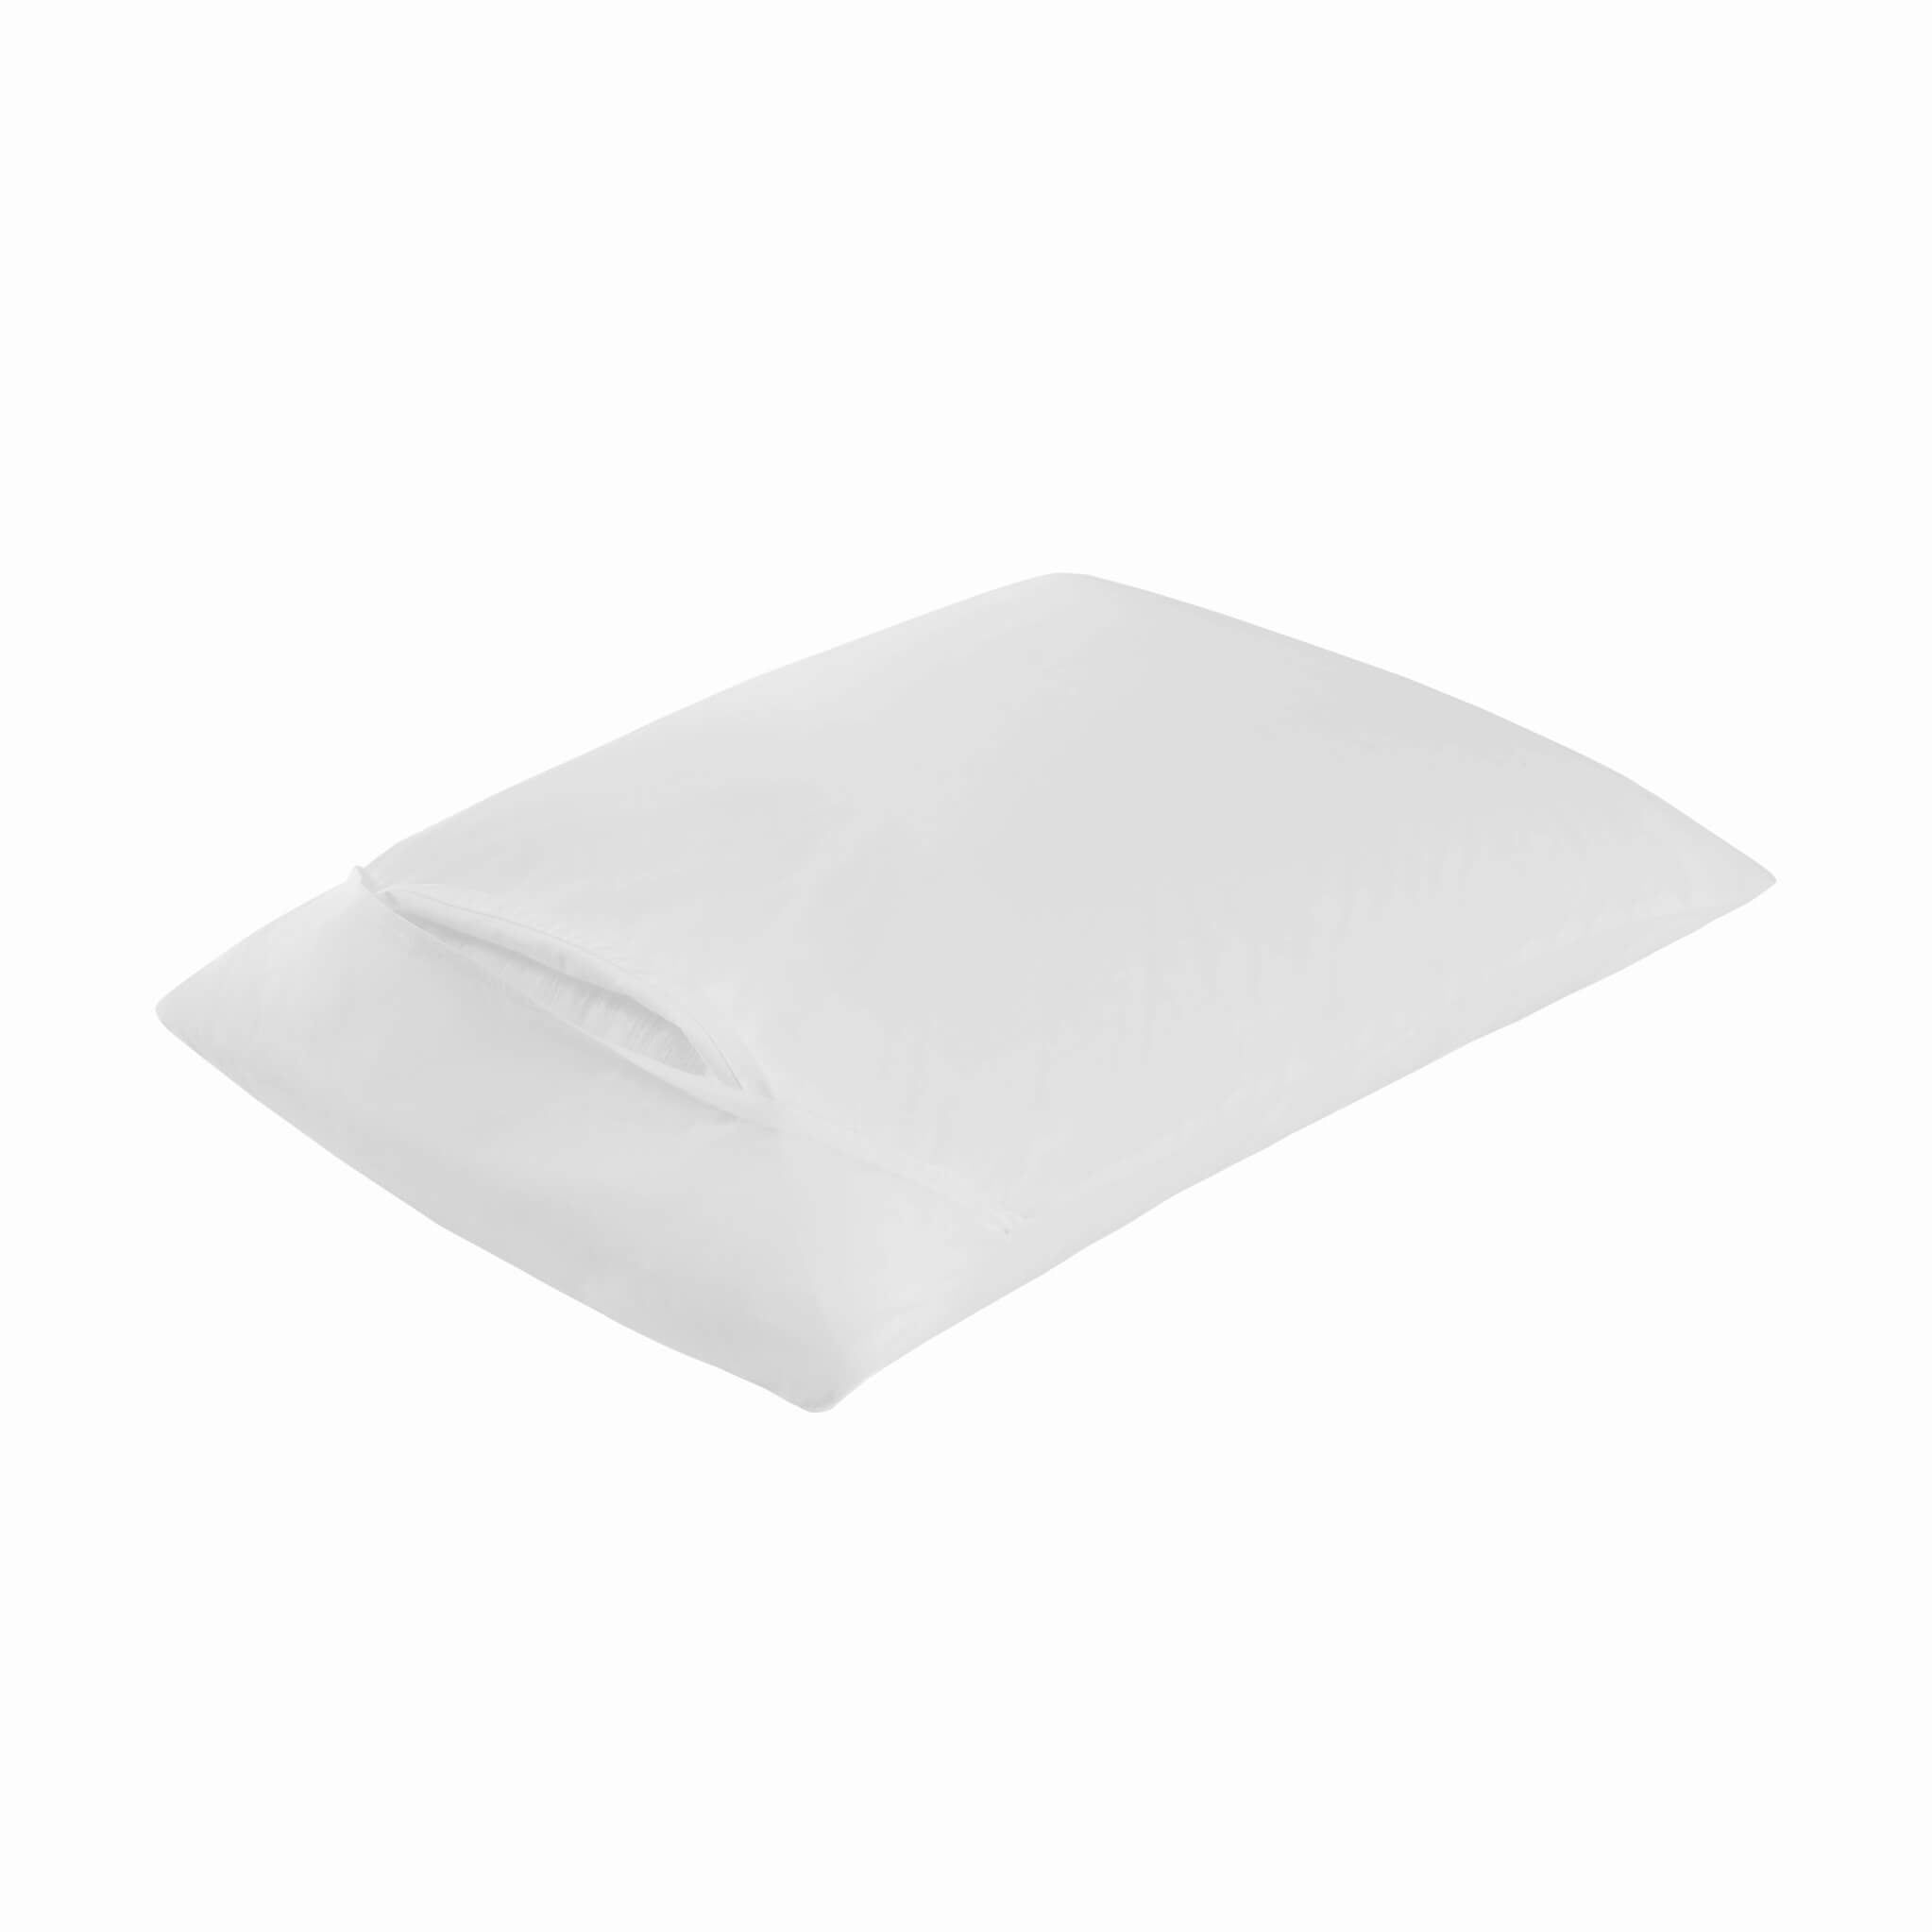 French Fold Pillow Covers Pillow Protector Bargoose Home Textiles, Inc. 